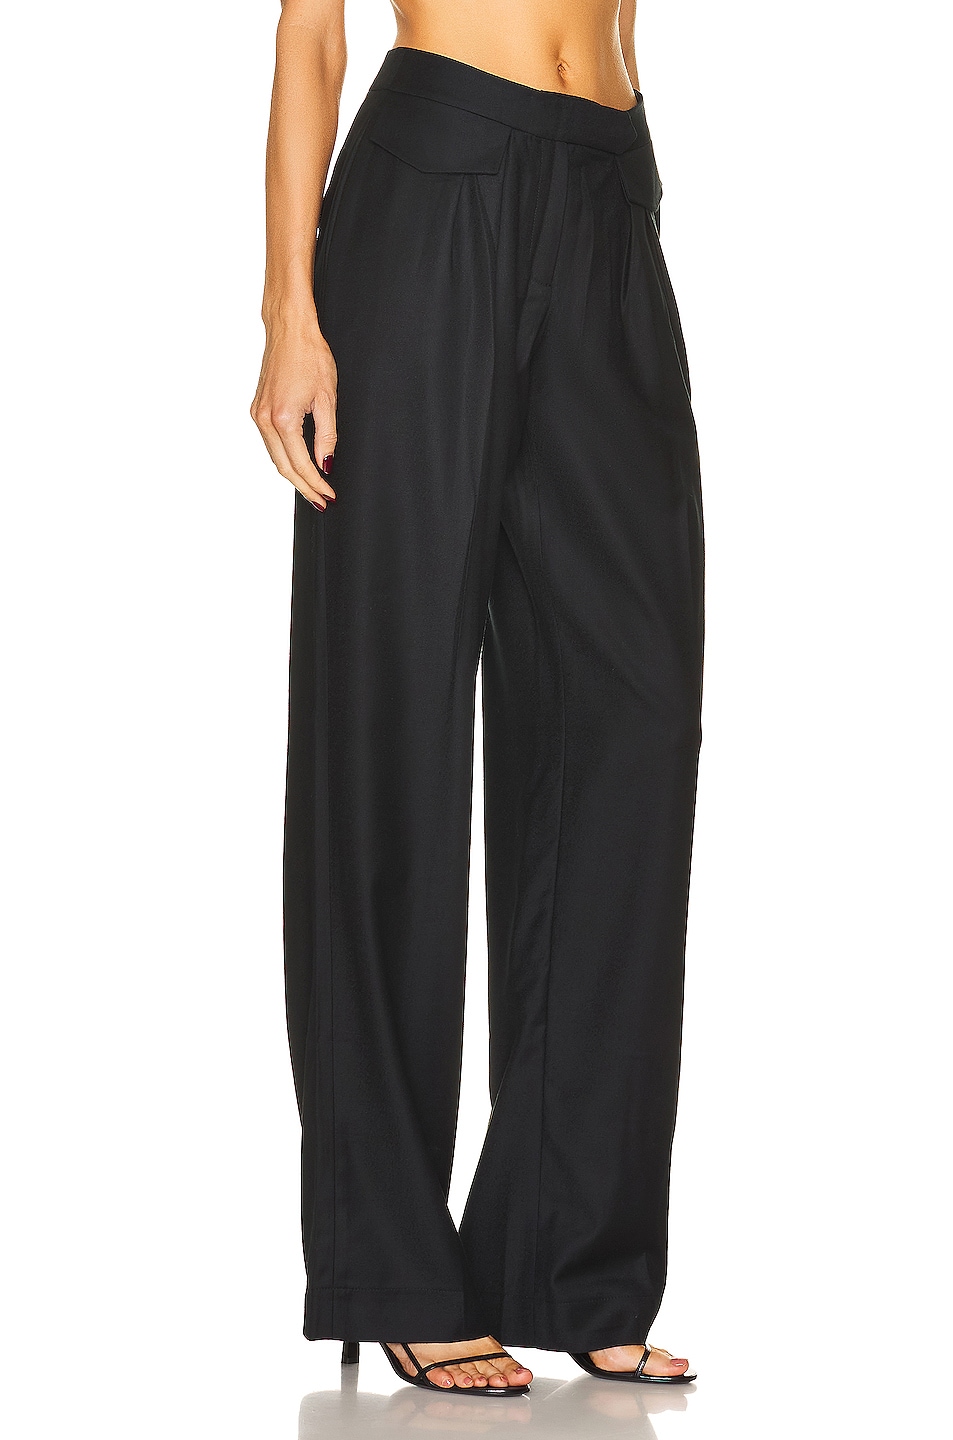 Aya Muse Cherry Blossom Pant in Black | FWRD